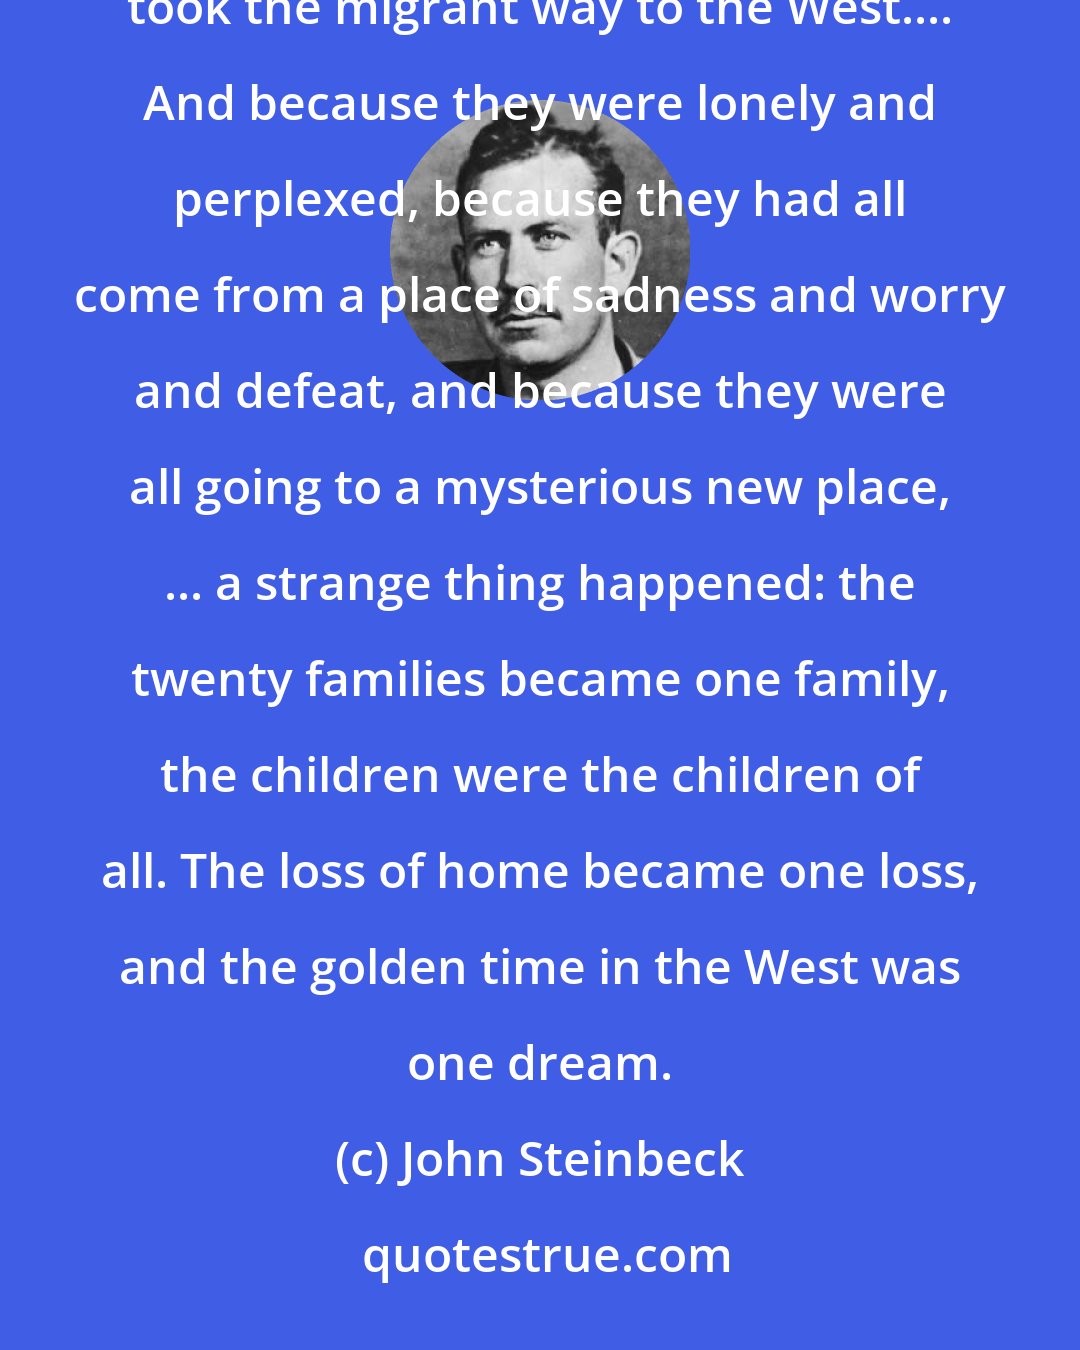 John Steinbeck: The cars of the migrant people crawled out of the side roads onto the great cross-country highway, and they took the migrant way to the West.... And because they were lonely and perplexed, because they had all come from a place of sadness and worry and defeat, and because they were all going to a mysterious new place, ... a strange thing happened: the twenty families became one family, the children were the children of all. The loss of home became one loss, and the golden time in the West was one dream.